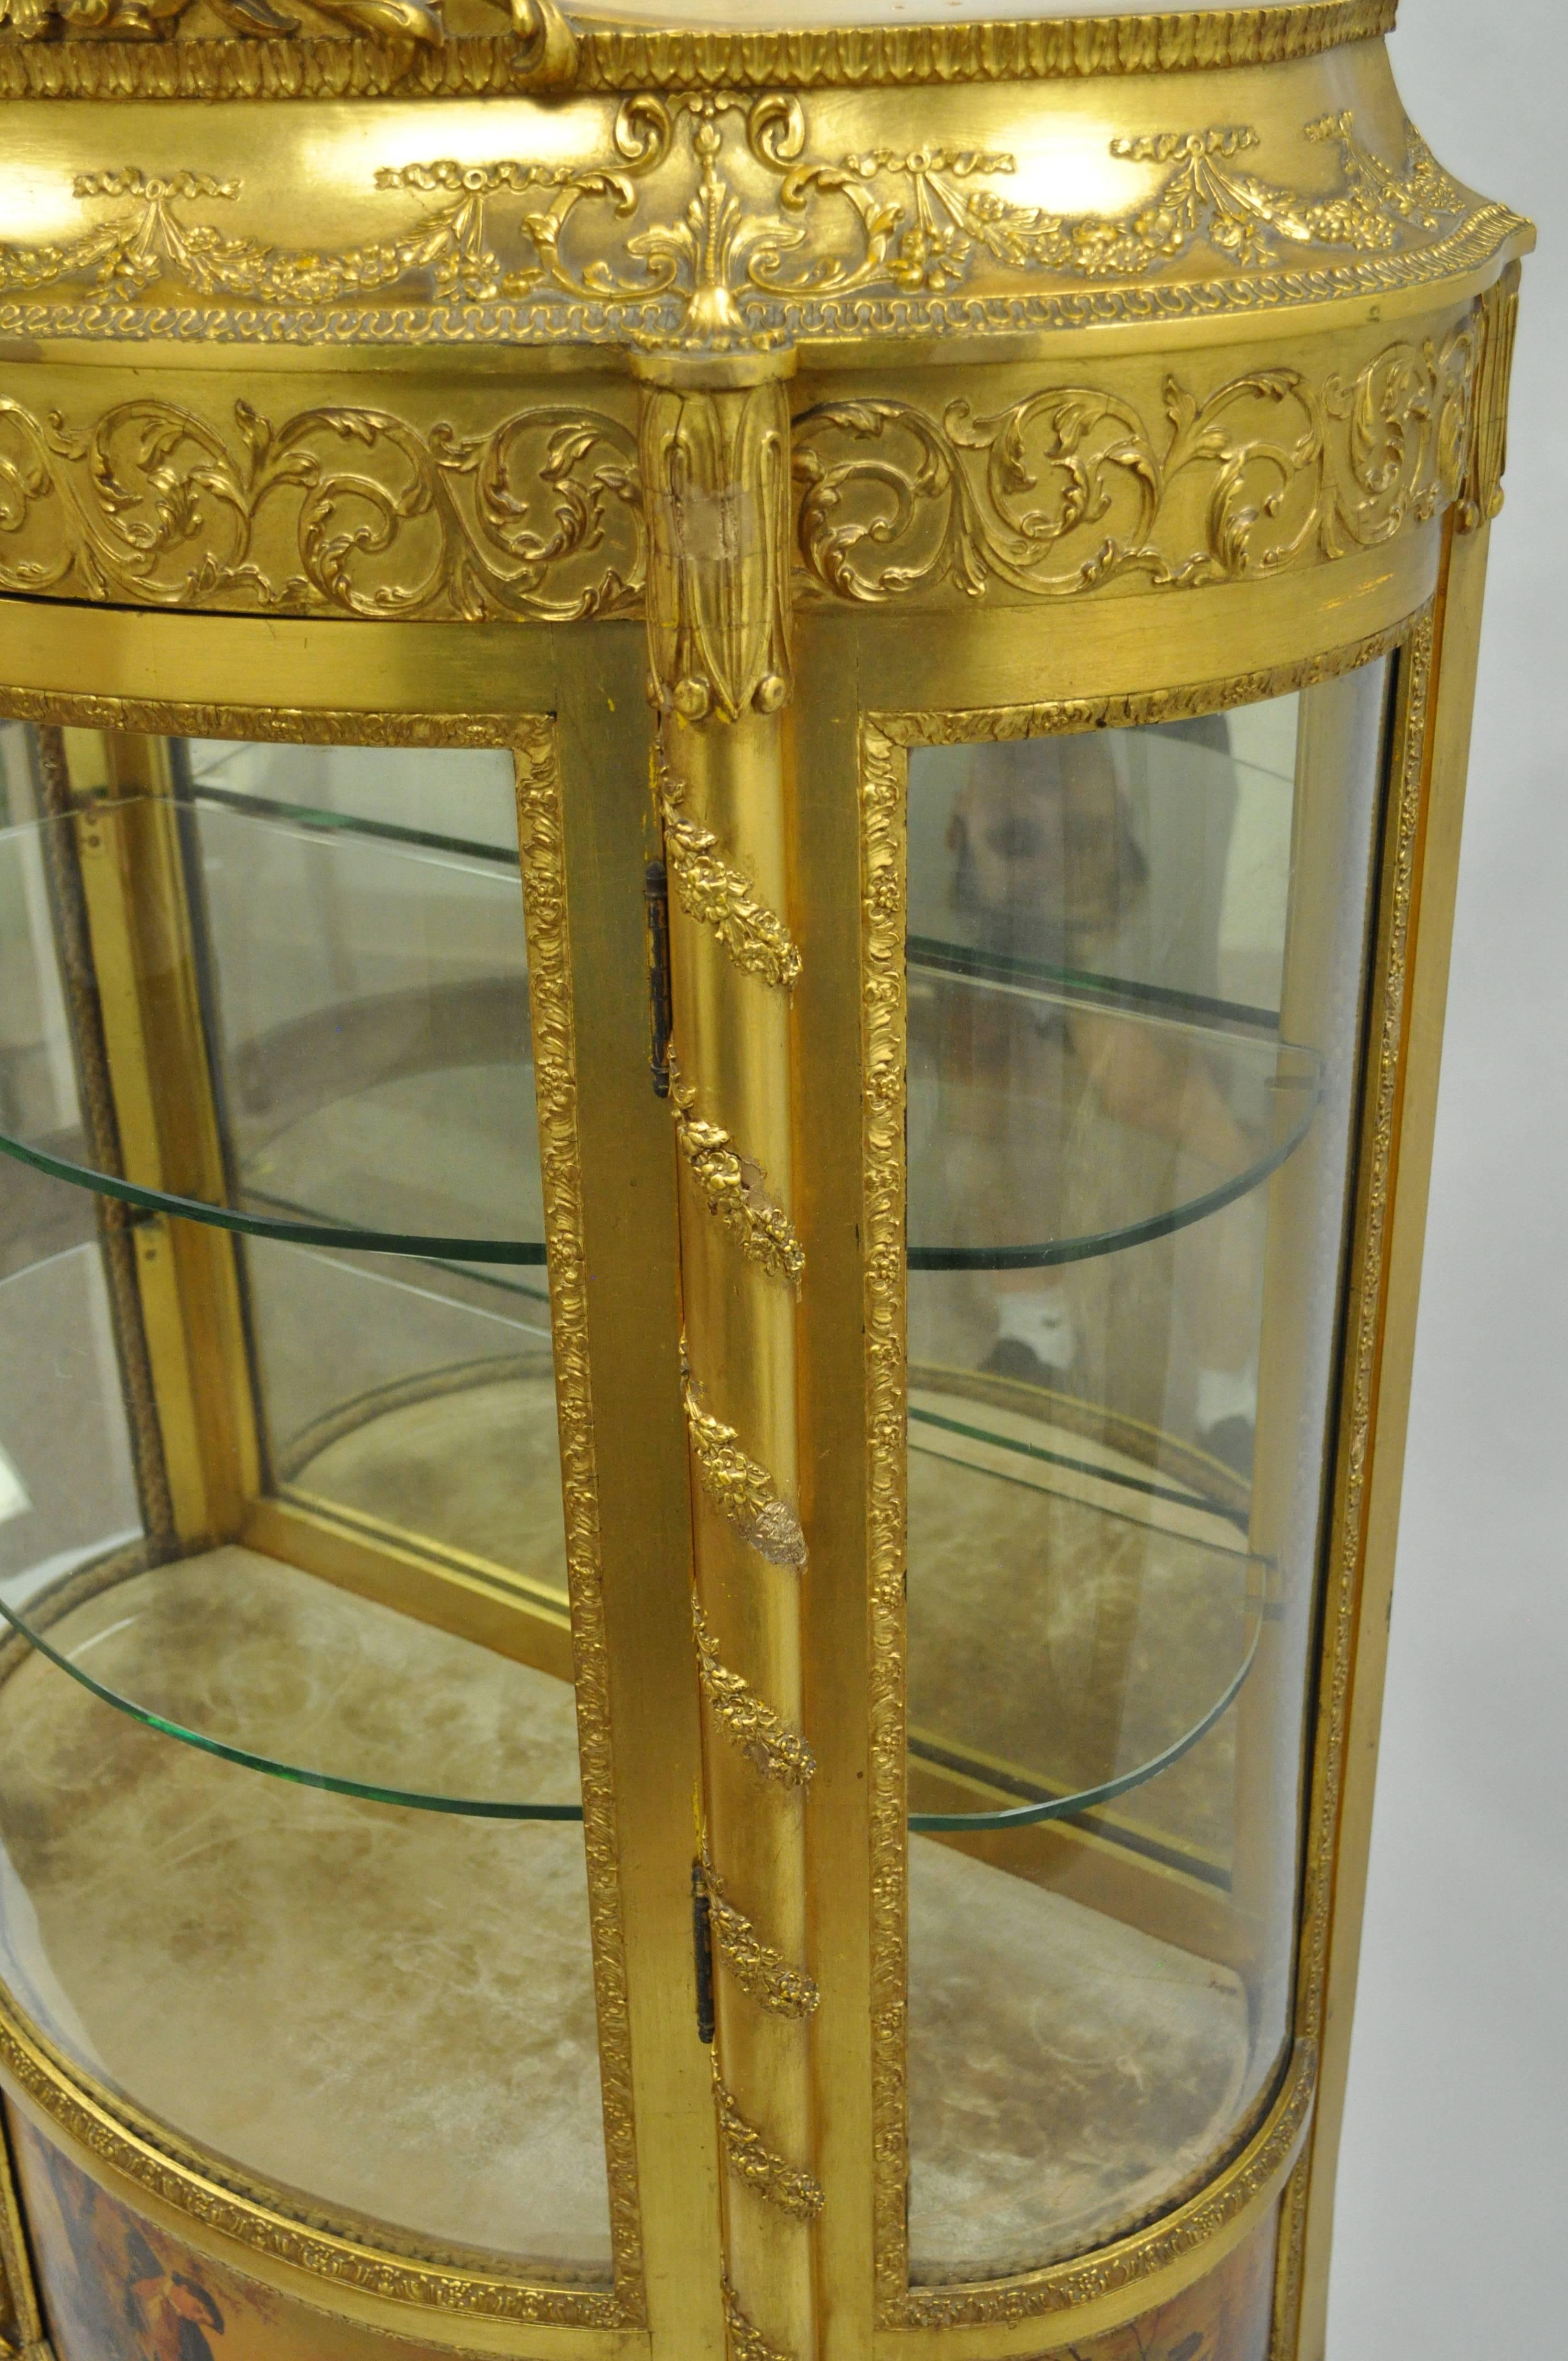 19th Century French Louis XV Gold Gilt Wood Vernis Martin Curved Glass Vitrine Curio Cabinet